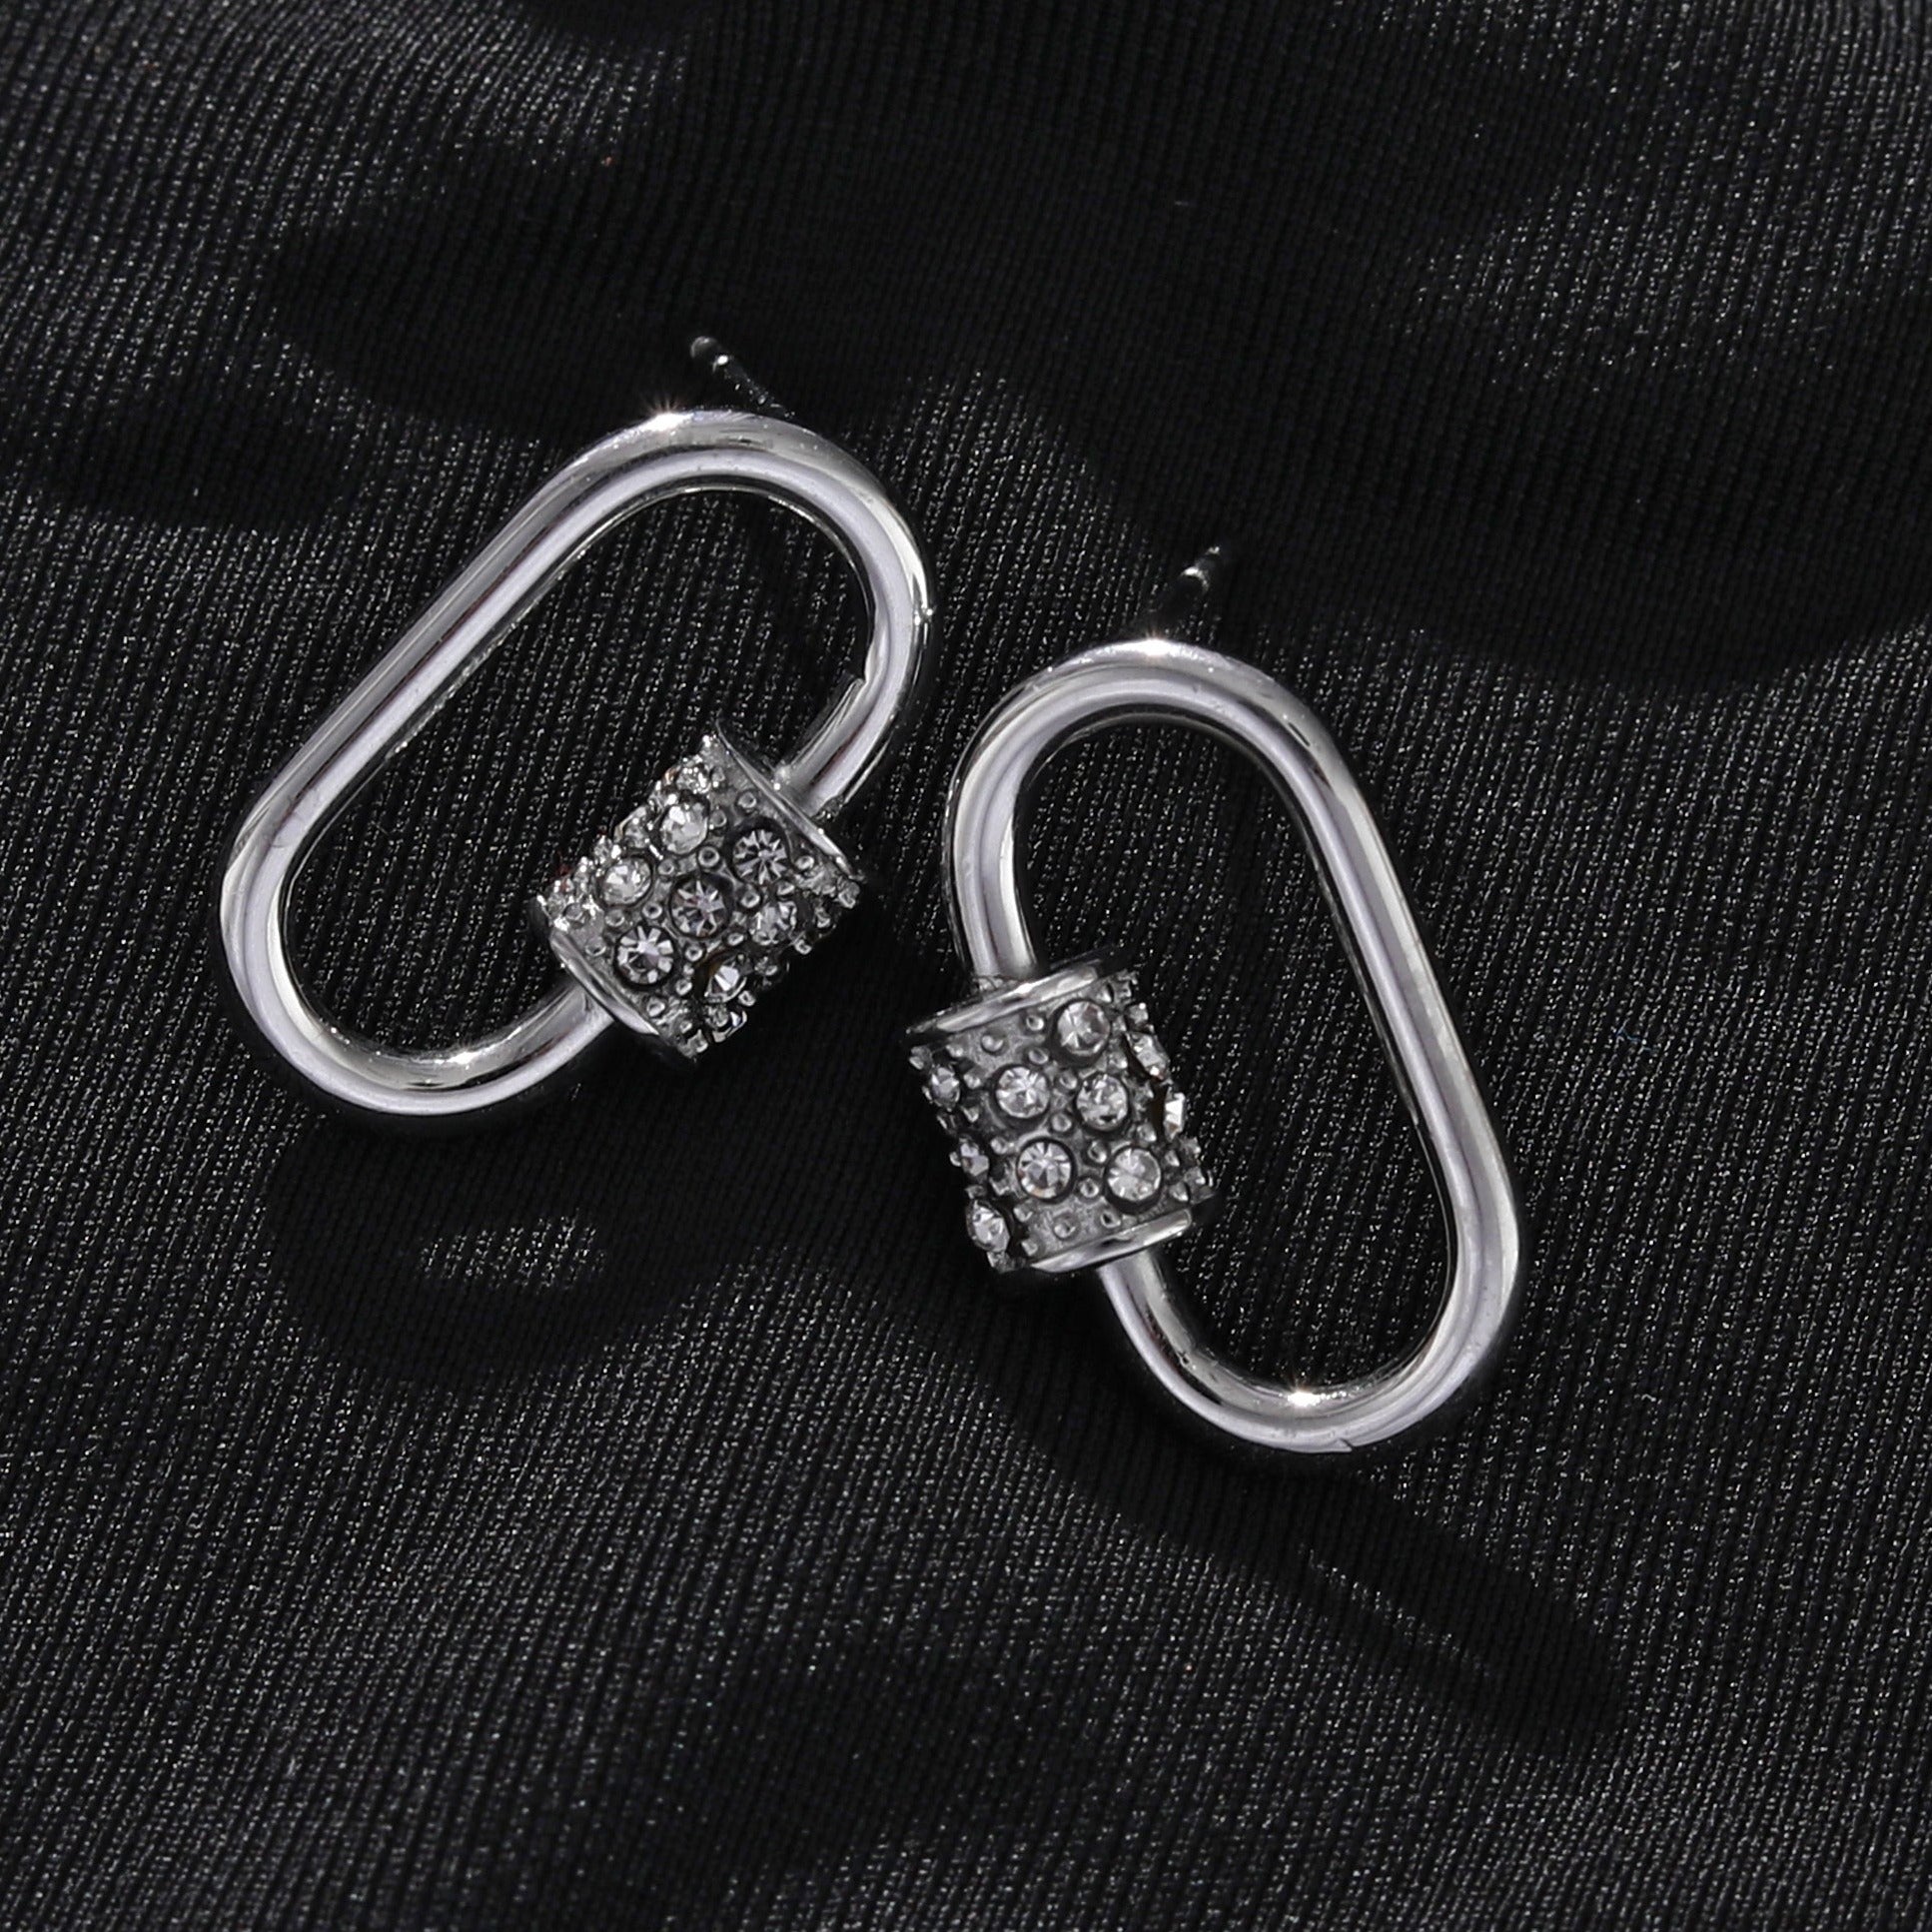 LENNON Silver Carabiner Earrings with Pavé Zirconia Accent